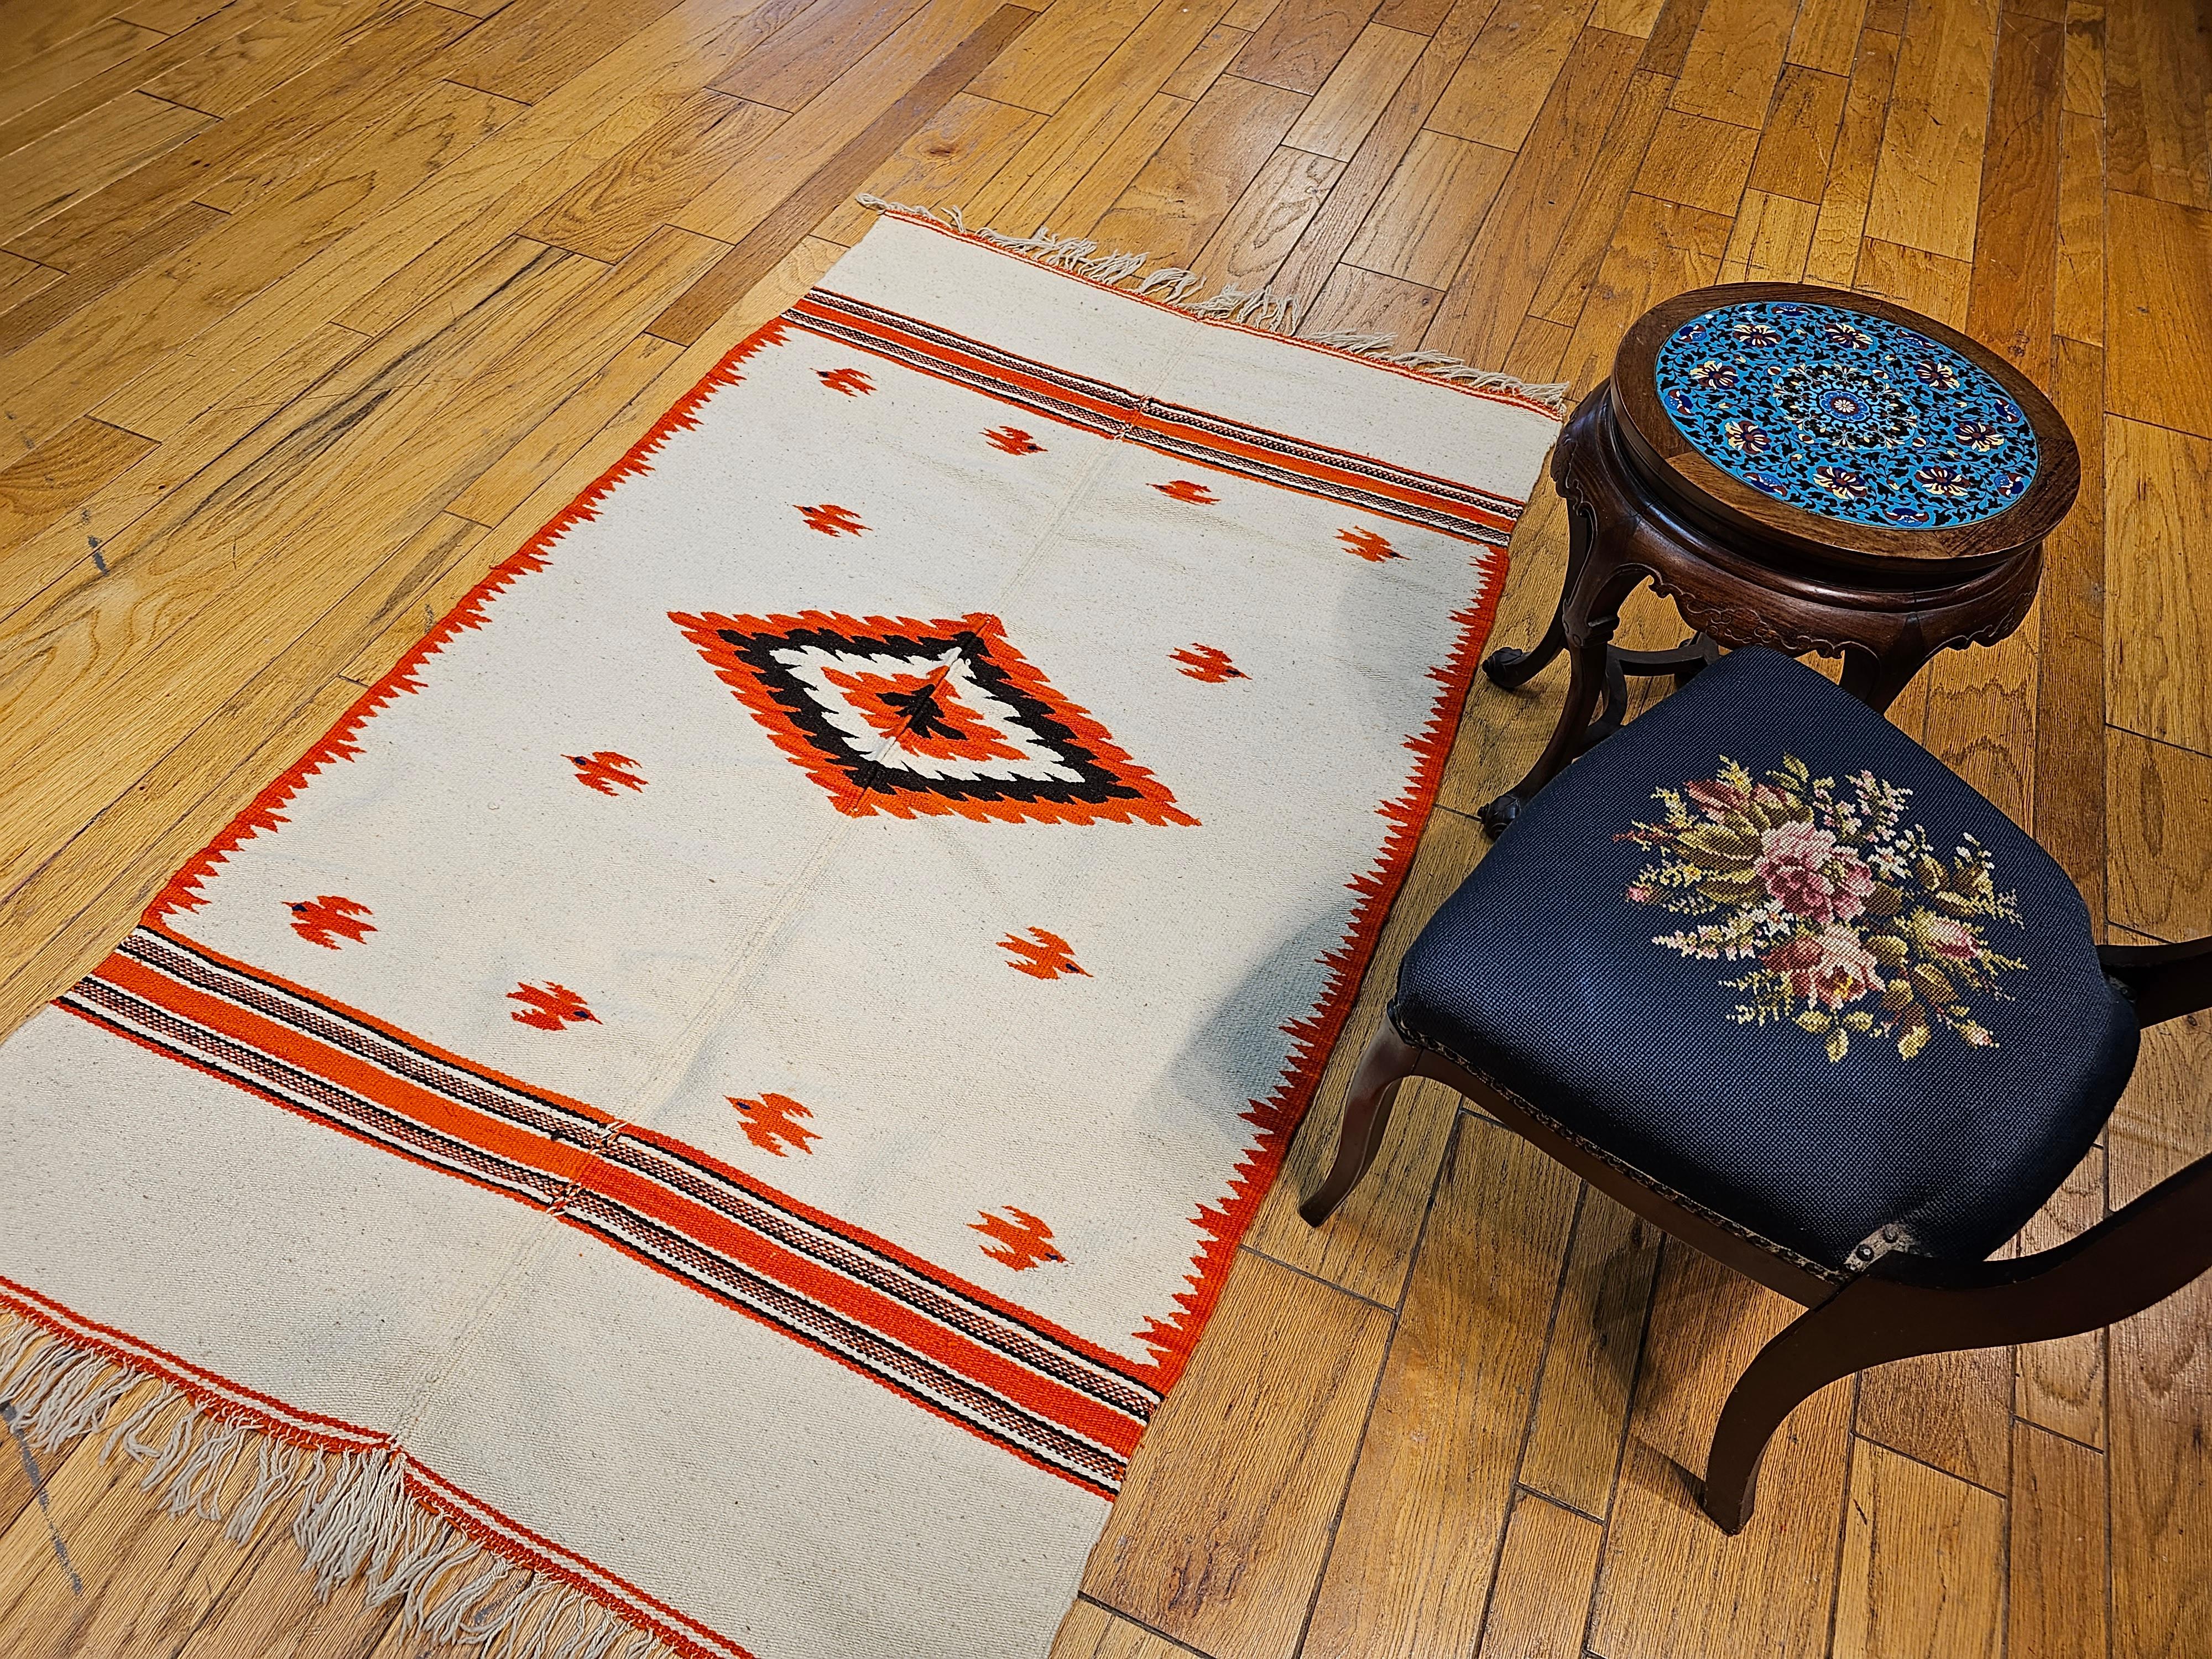 Vintage Mexican Serape Saltillo Kilim Rug with Mythical Bird Designs For Sale 3